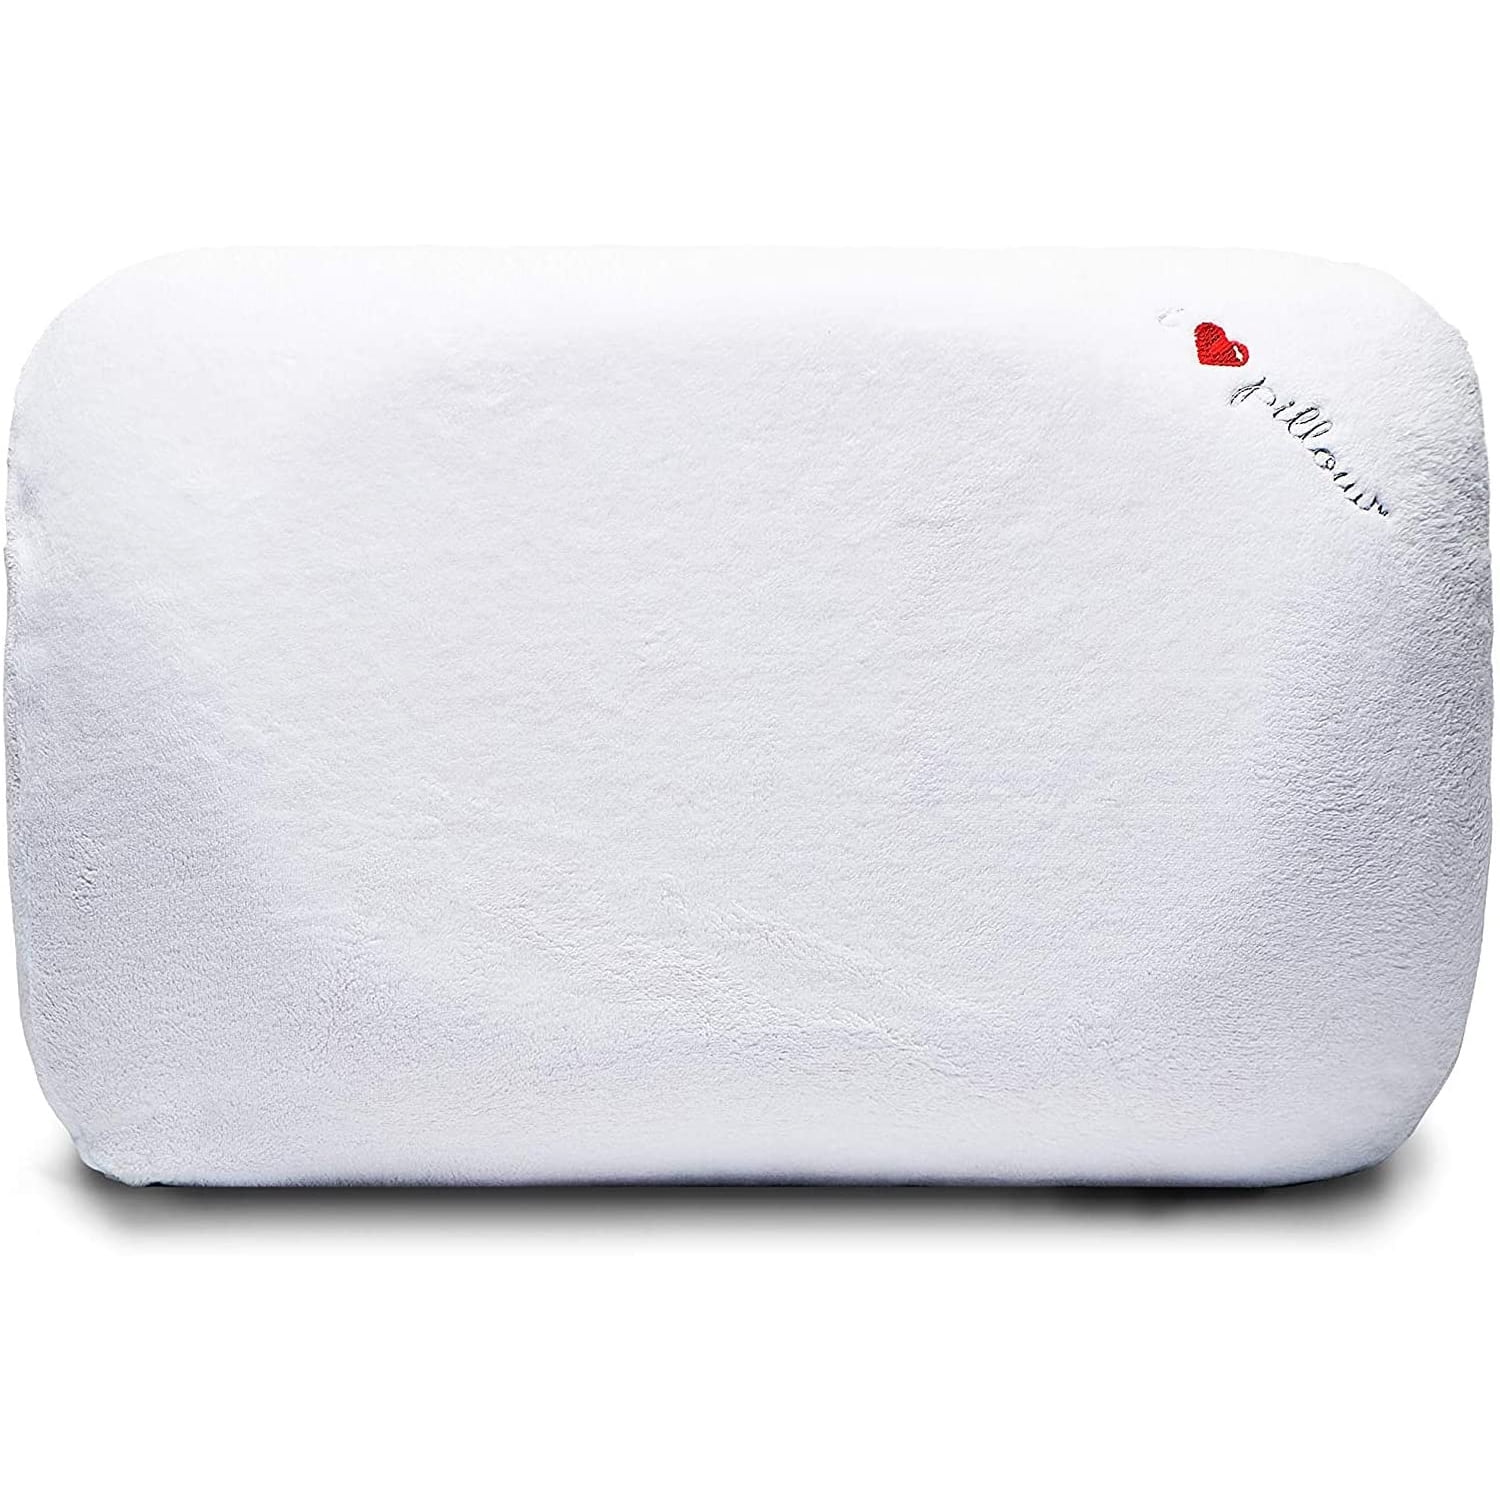 MyPillow MP-SD-MF 18.5 x 26 inch Classic Series Bed Pillow for sale online 